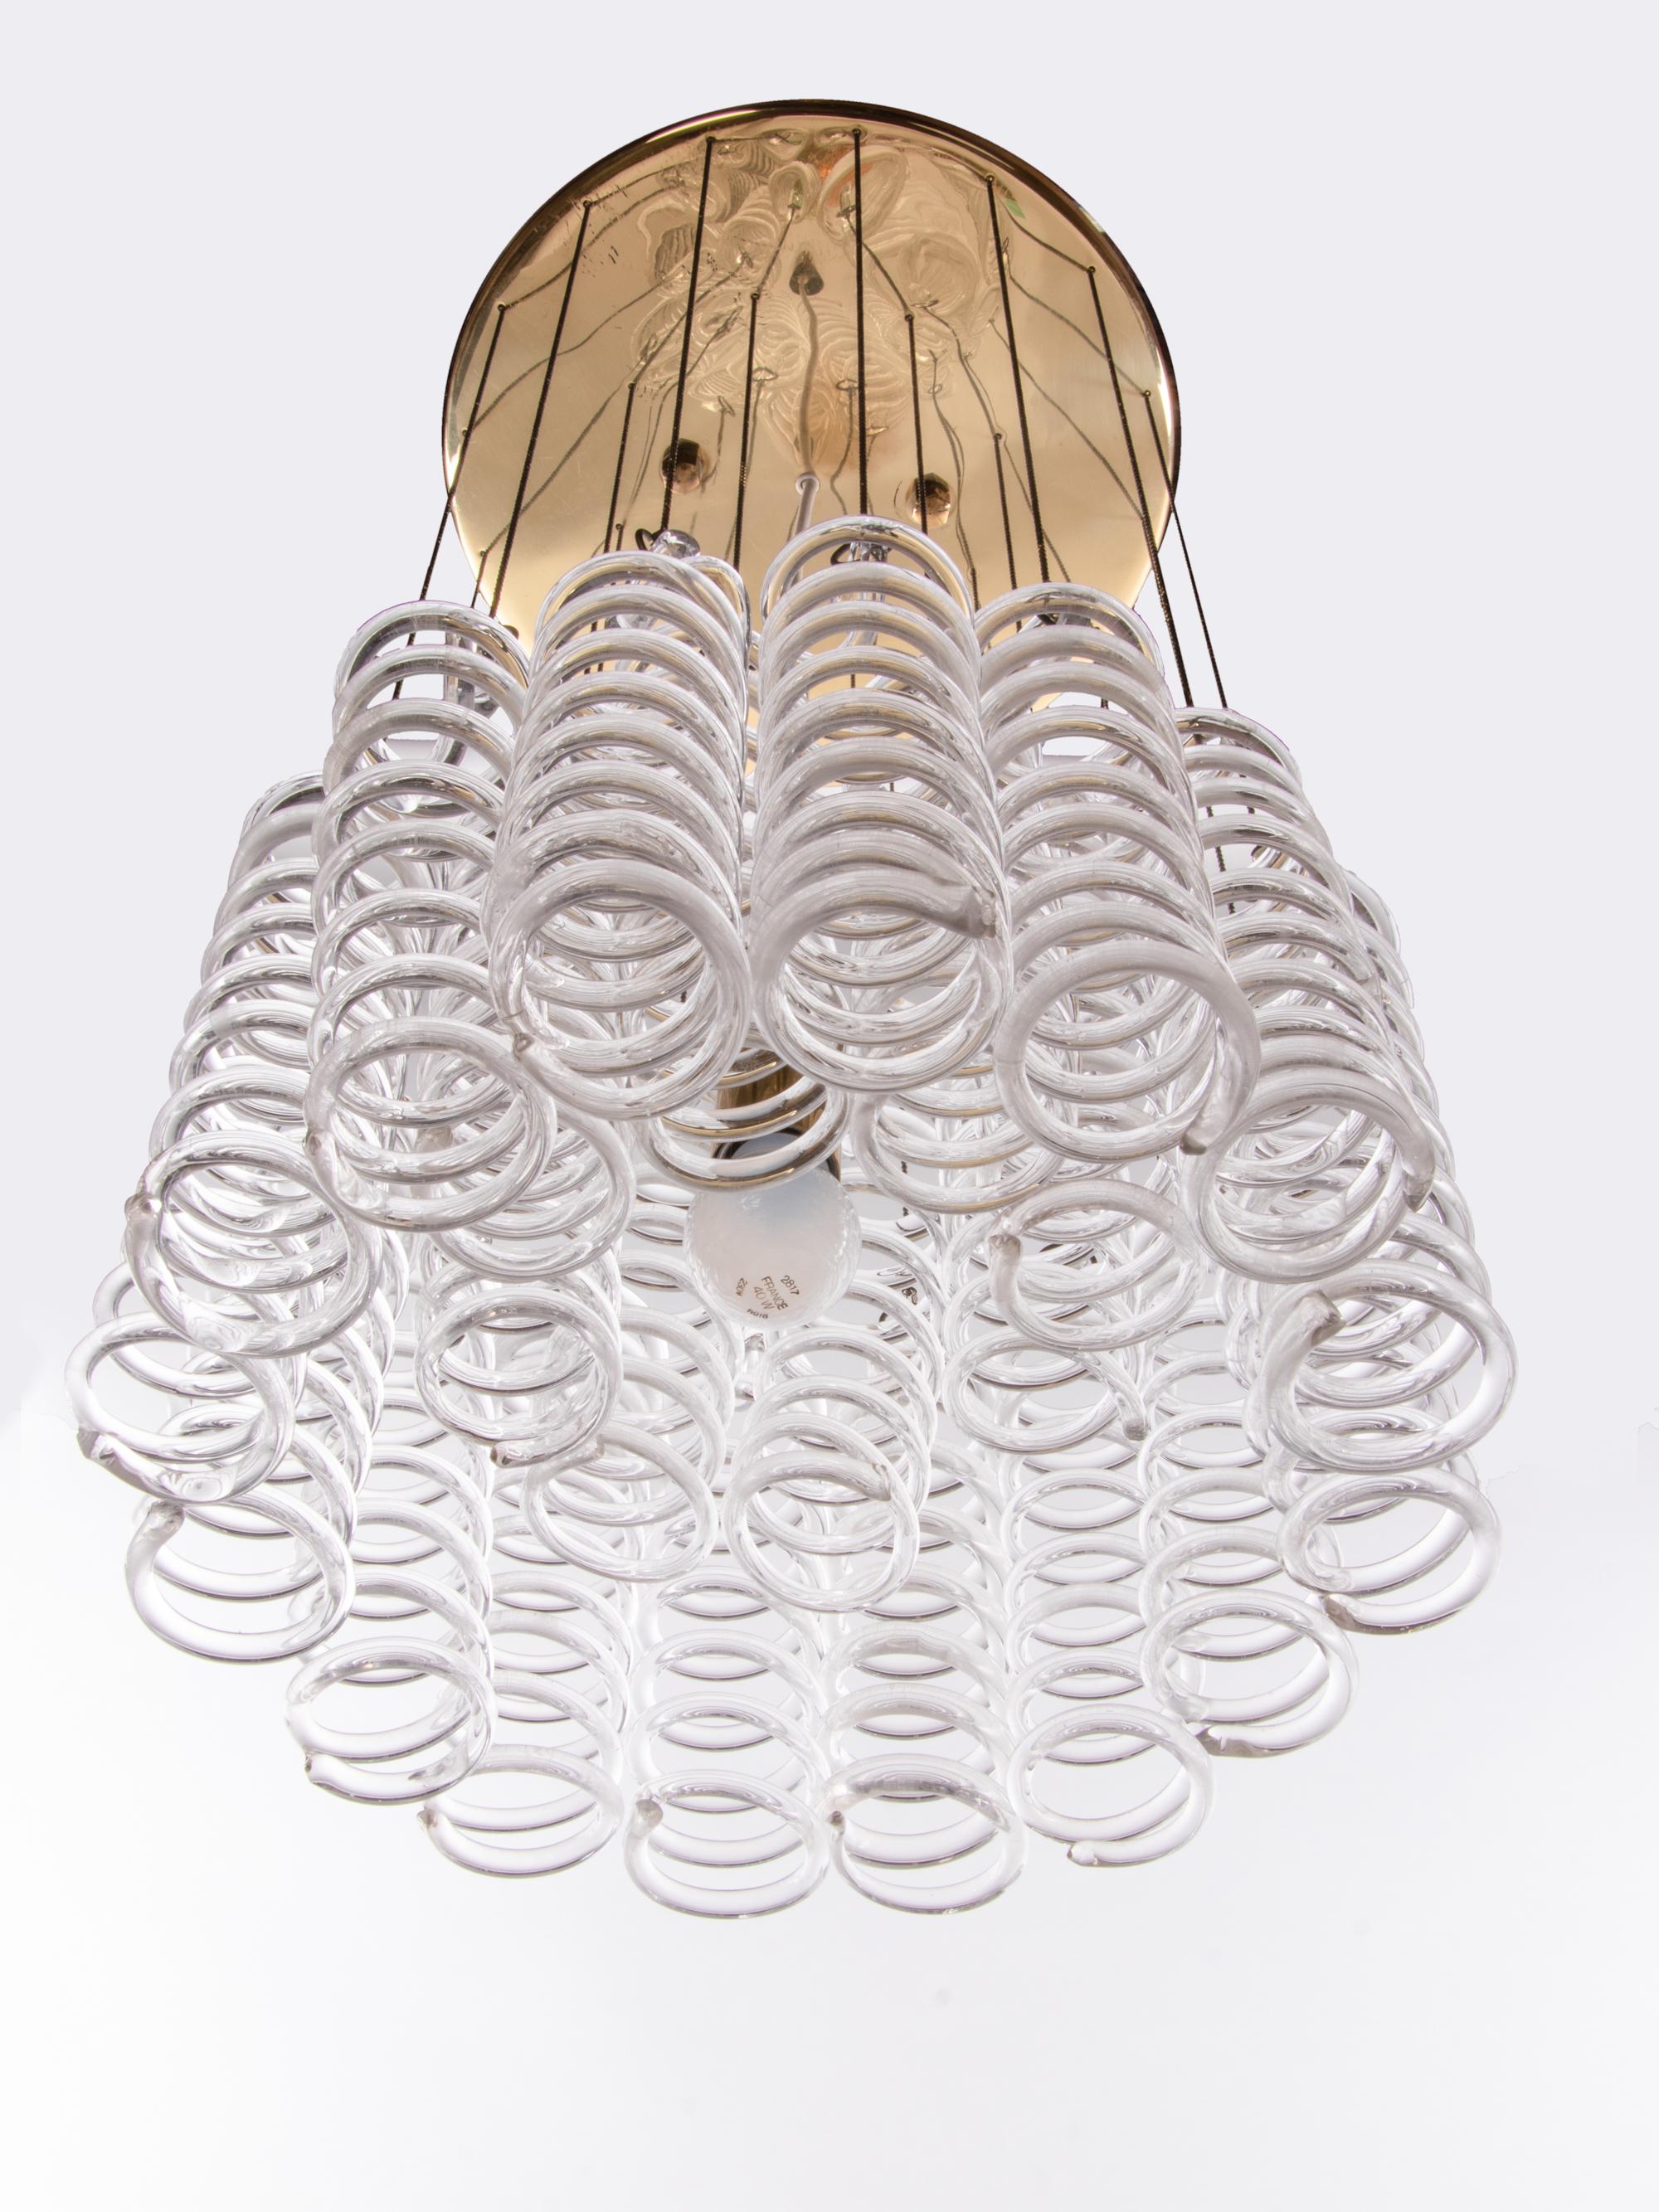 Italian Cascading Spiral Chandelier Murano Glass & Brass in the manner of Mazzega, 1960s For Sale